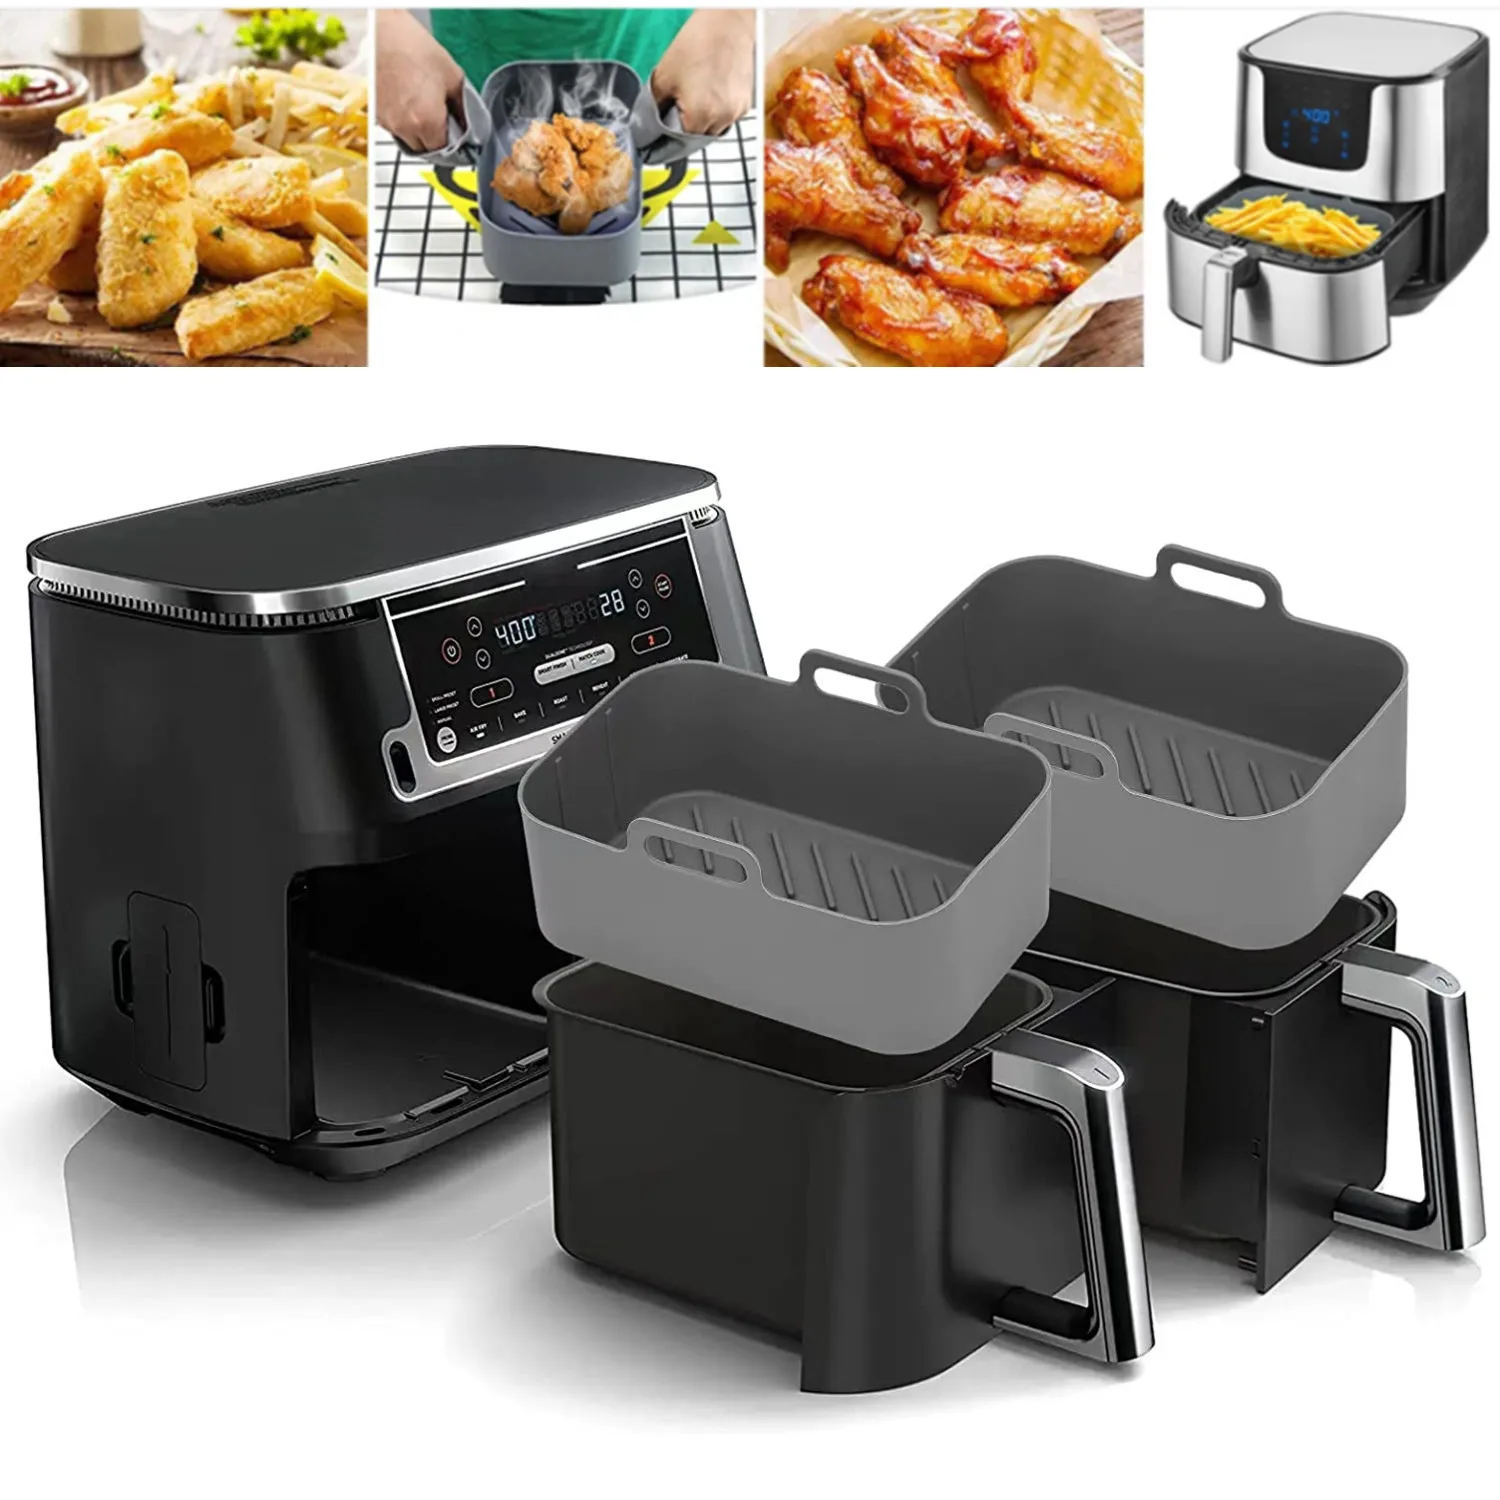 https://ae01.alicdn.com/kf/S02ff4ae8a75f4799a17c80d8382c0284U/1pc-Silicone-Pot-Rectangle-Oven-Air-Fryer-Baking-Tray-Mold-Basket-Liner-for-Ninja-Foodi-Dual.jpg